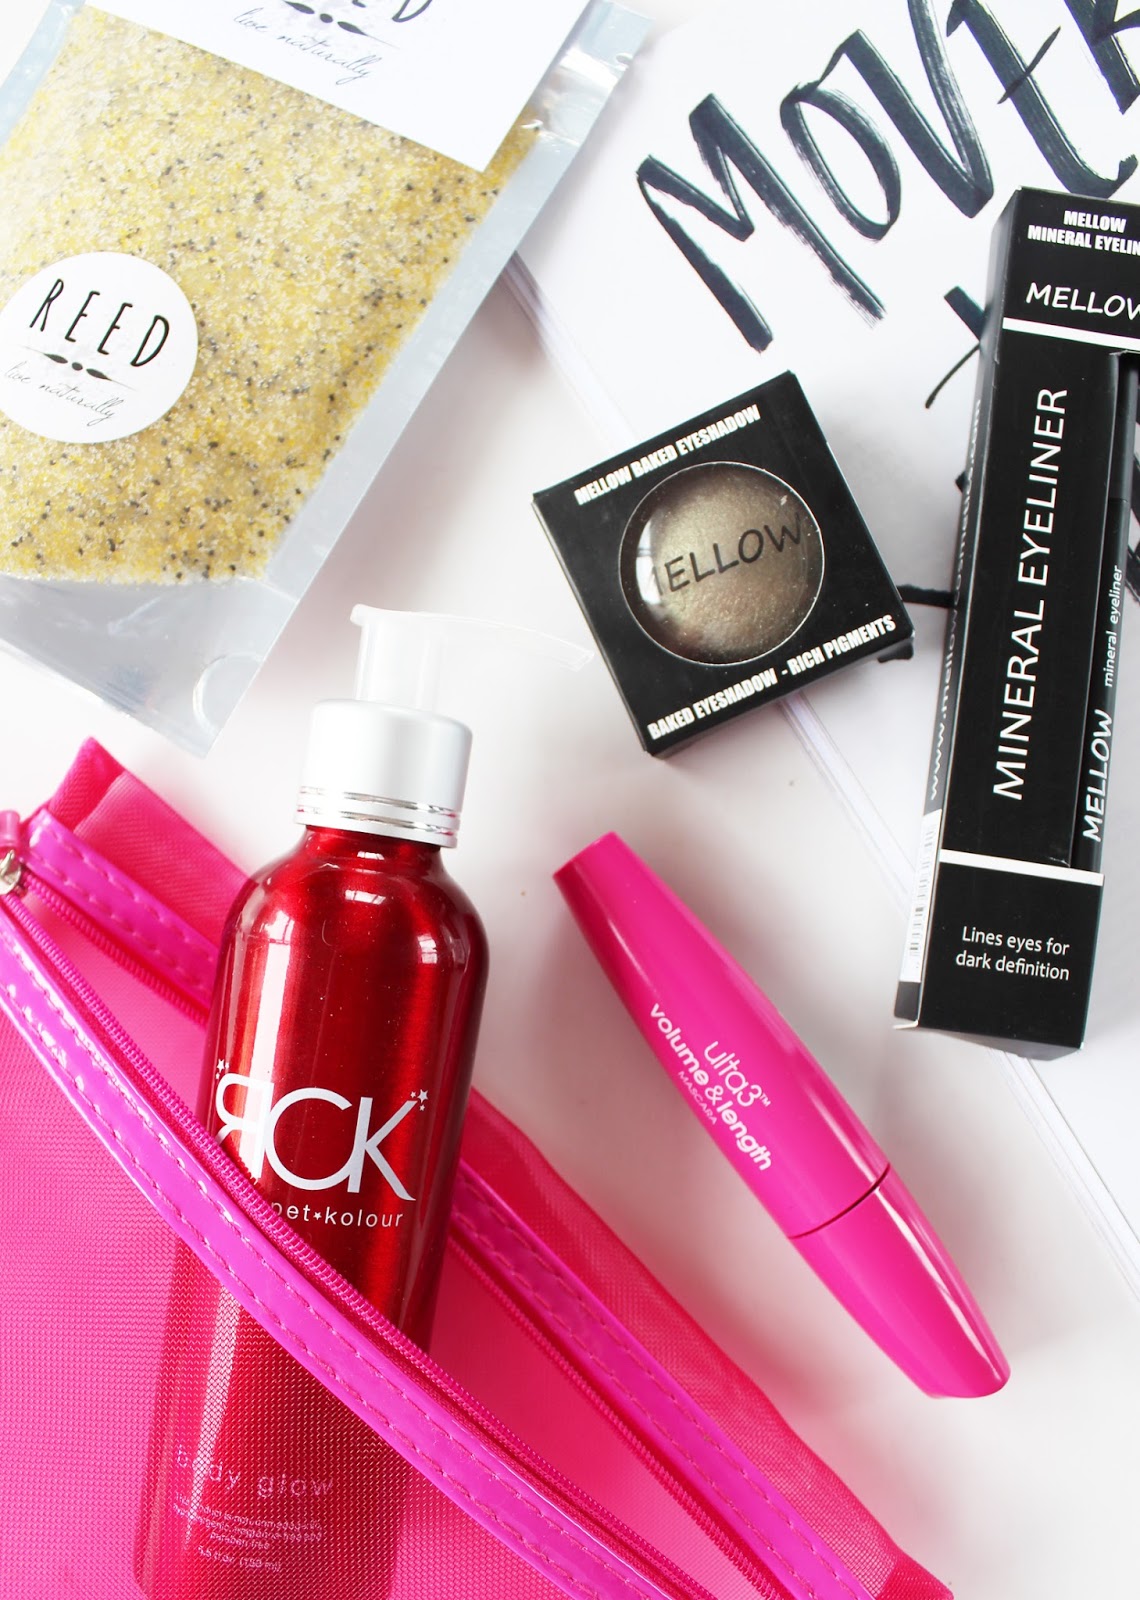 LUST HAVE IT | Women's Beauty Box August '15 Unboxing + Initial Thoughts - CassandraMyee